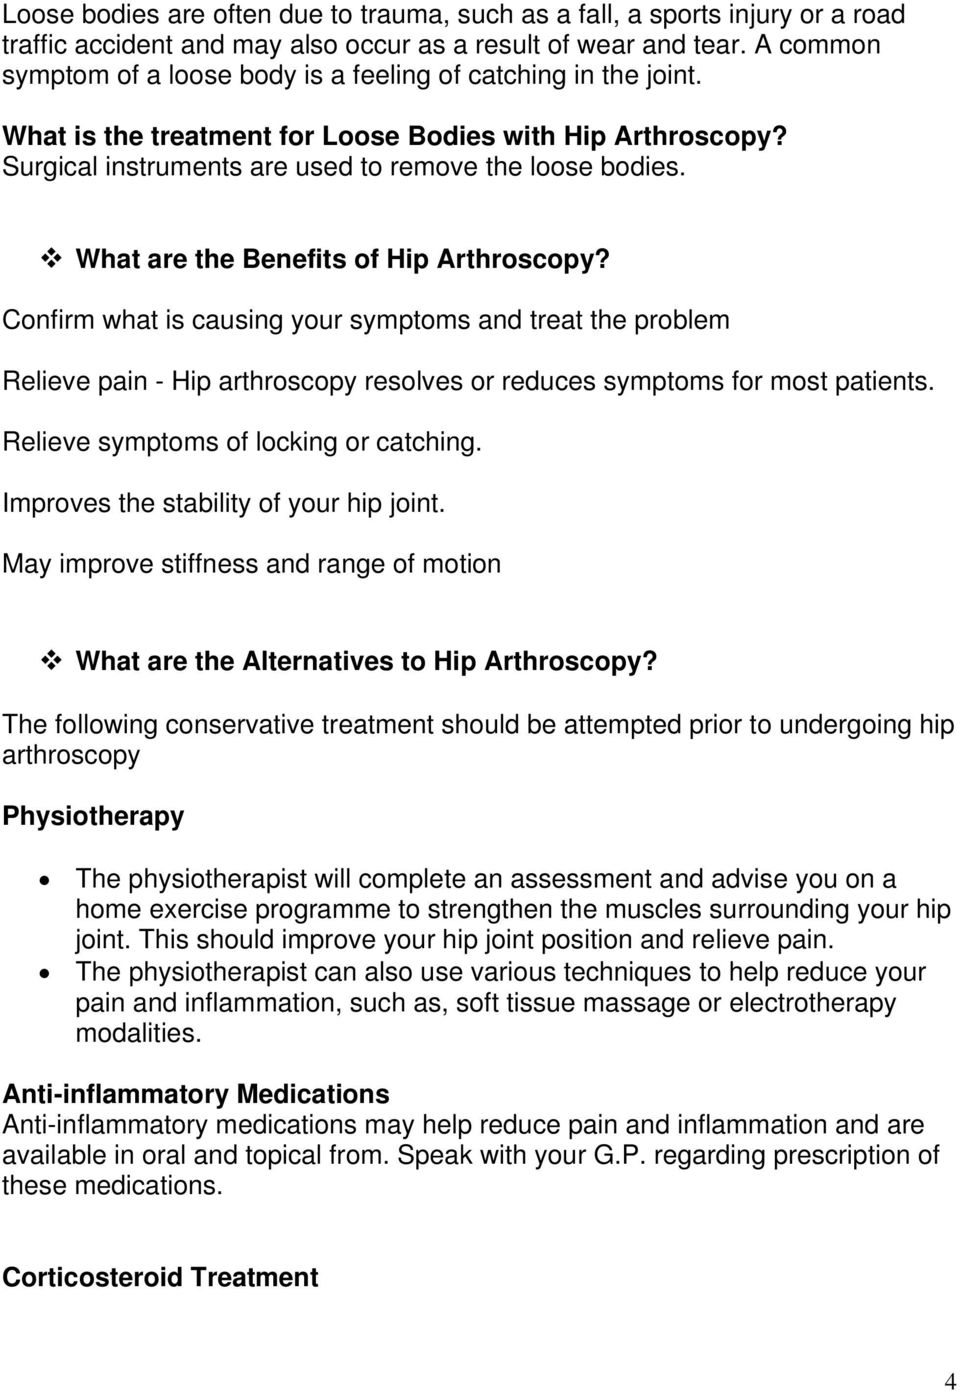 What are the Benefits of Hip Arthroscopy? Confirm what is causing your symptoms and treat the problem Relieve pain - Hip arthroscopy resolves or reduces symptoms for most patients.